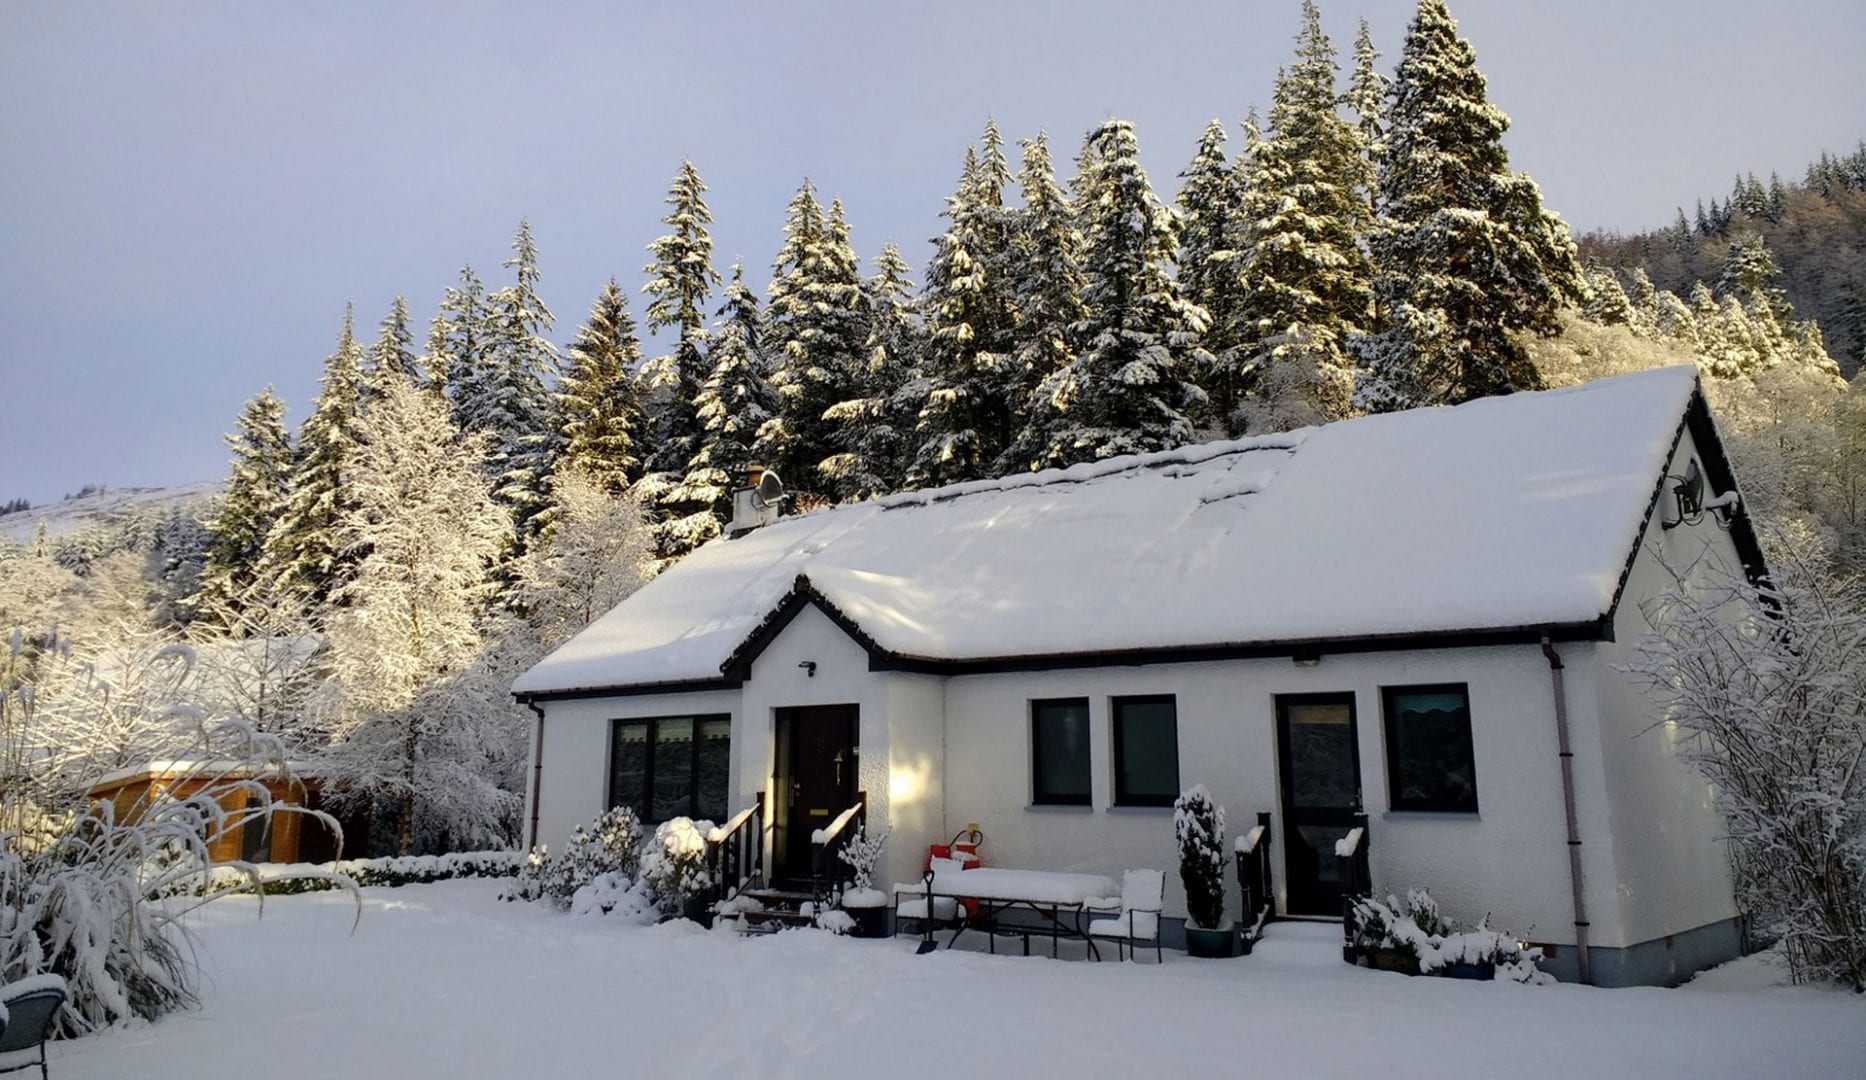 forest way bunkhouse in the snow winter 2020